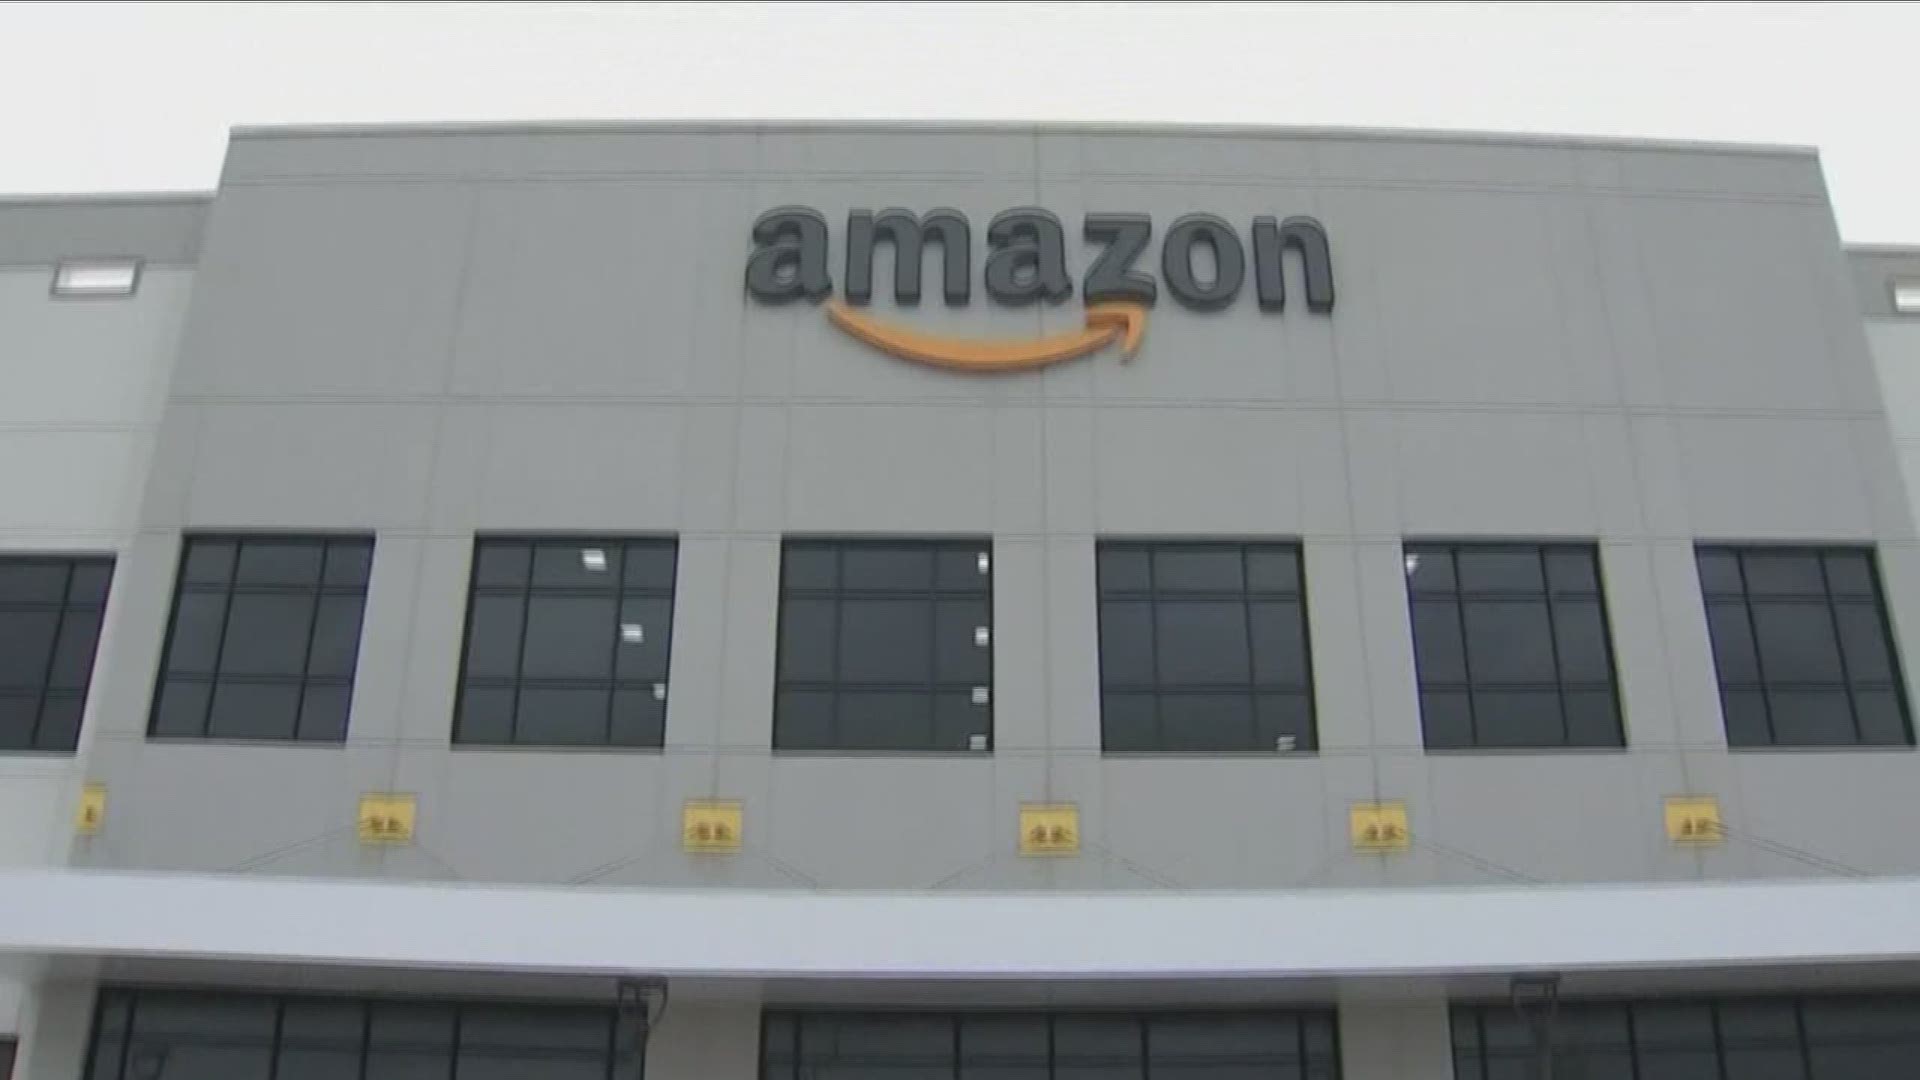 Charlotte Keith from Investigative Post compares the tax breaks for Amazon with those that Tesla received from New York State to locate a facility in Buffalo.